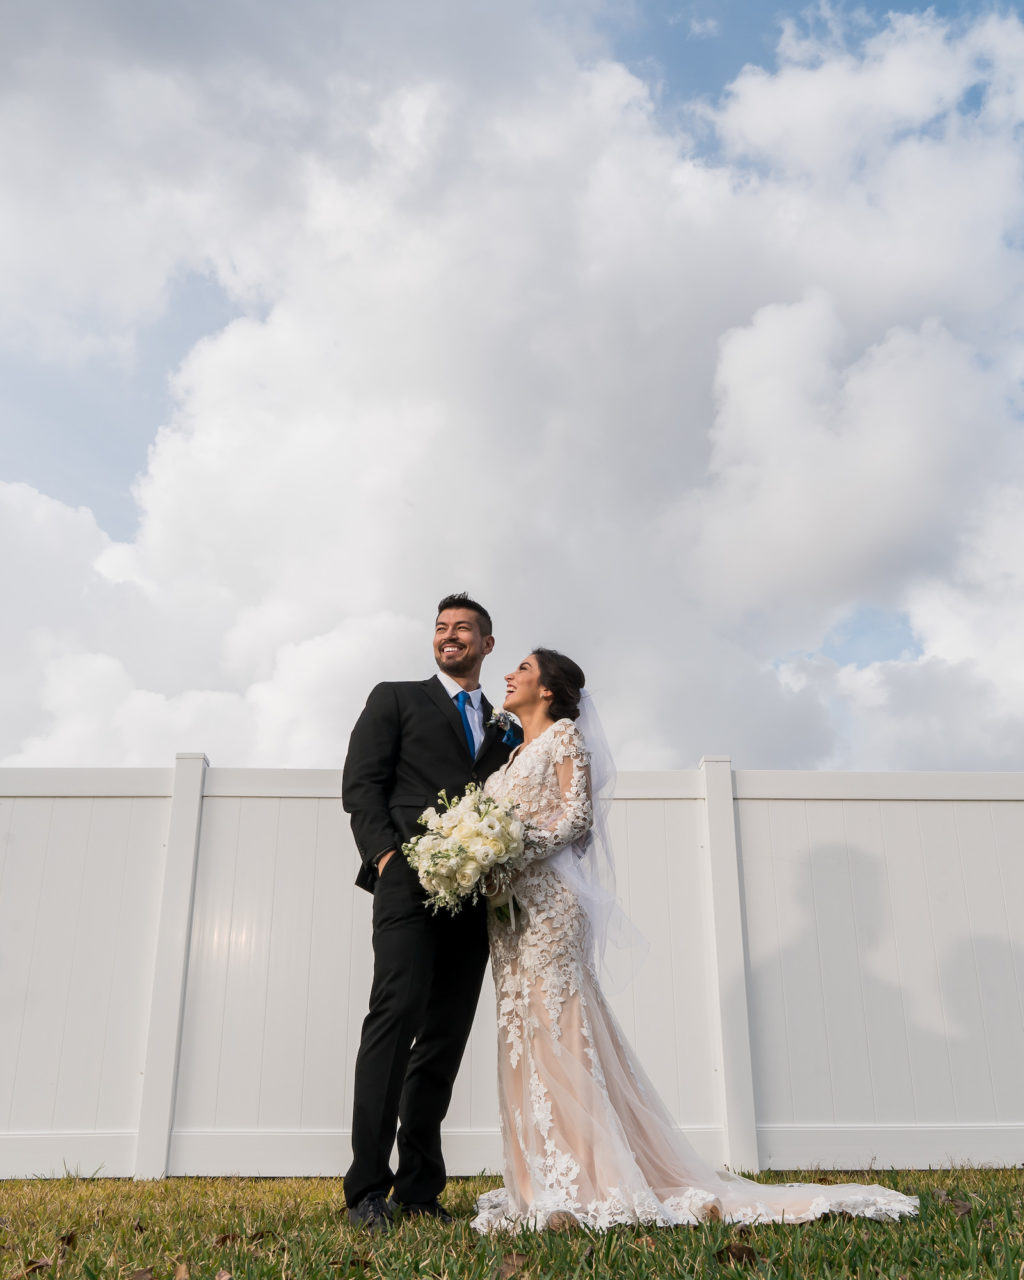 Tampa Bride in Romantic Lace and Illusion Long Sleeve Wedding Dress Holding White Floral Bouquet with Groom